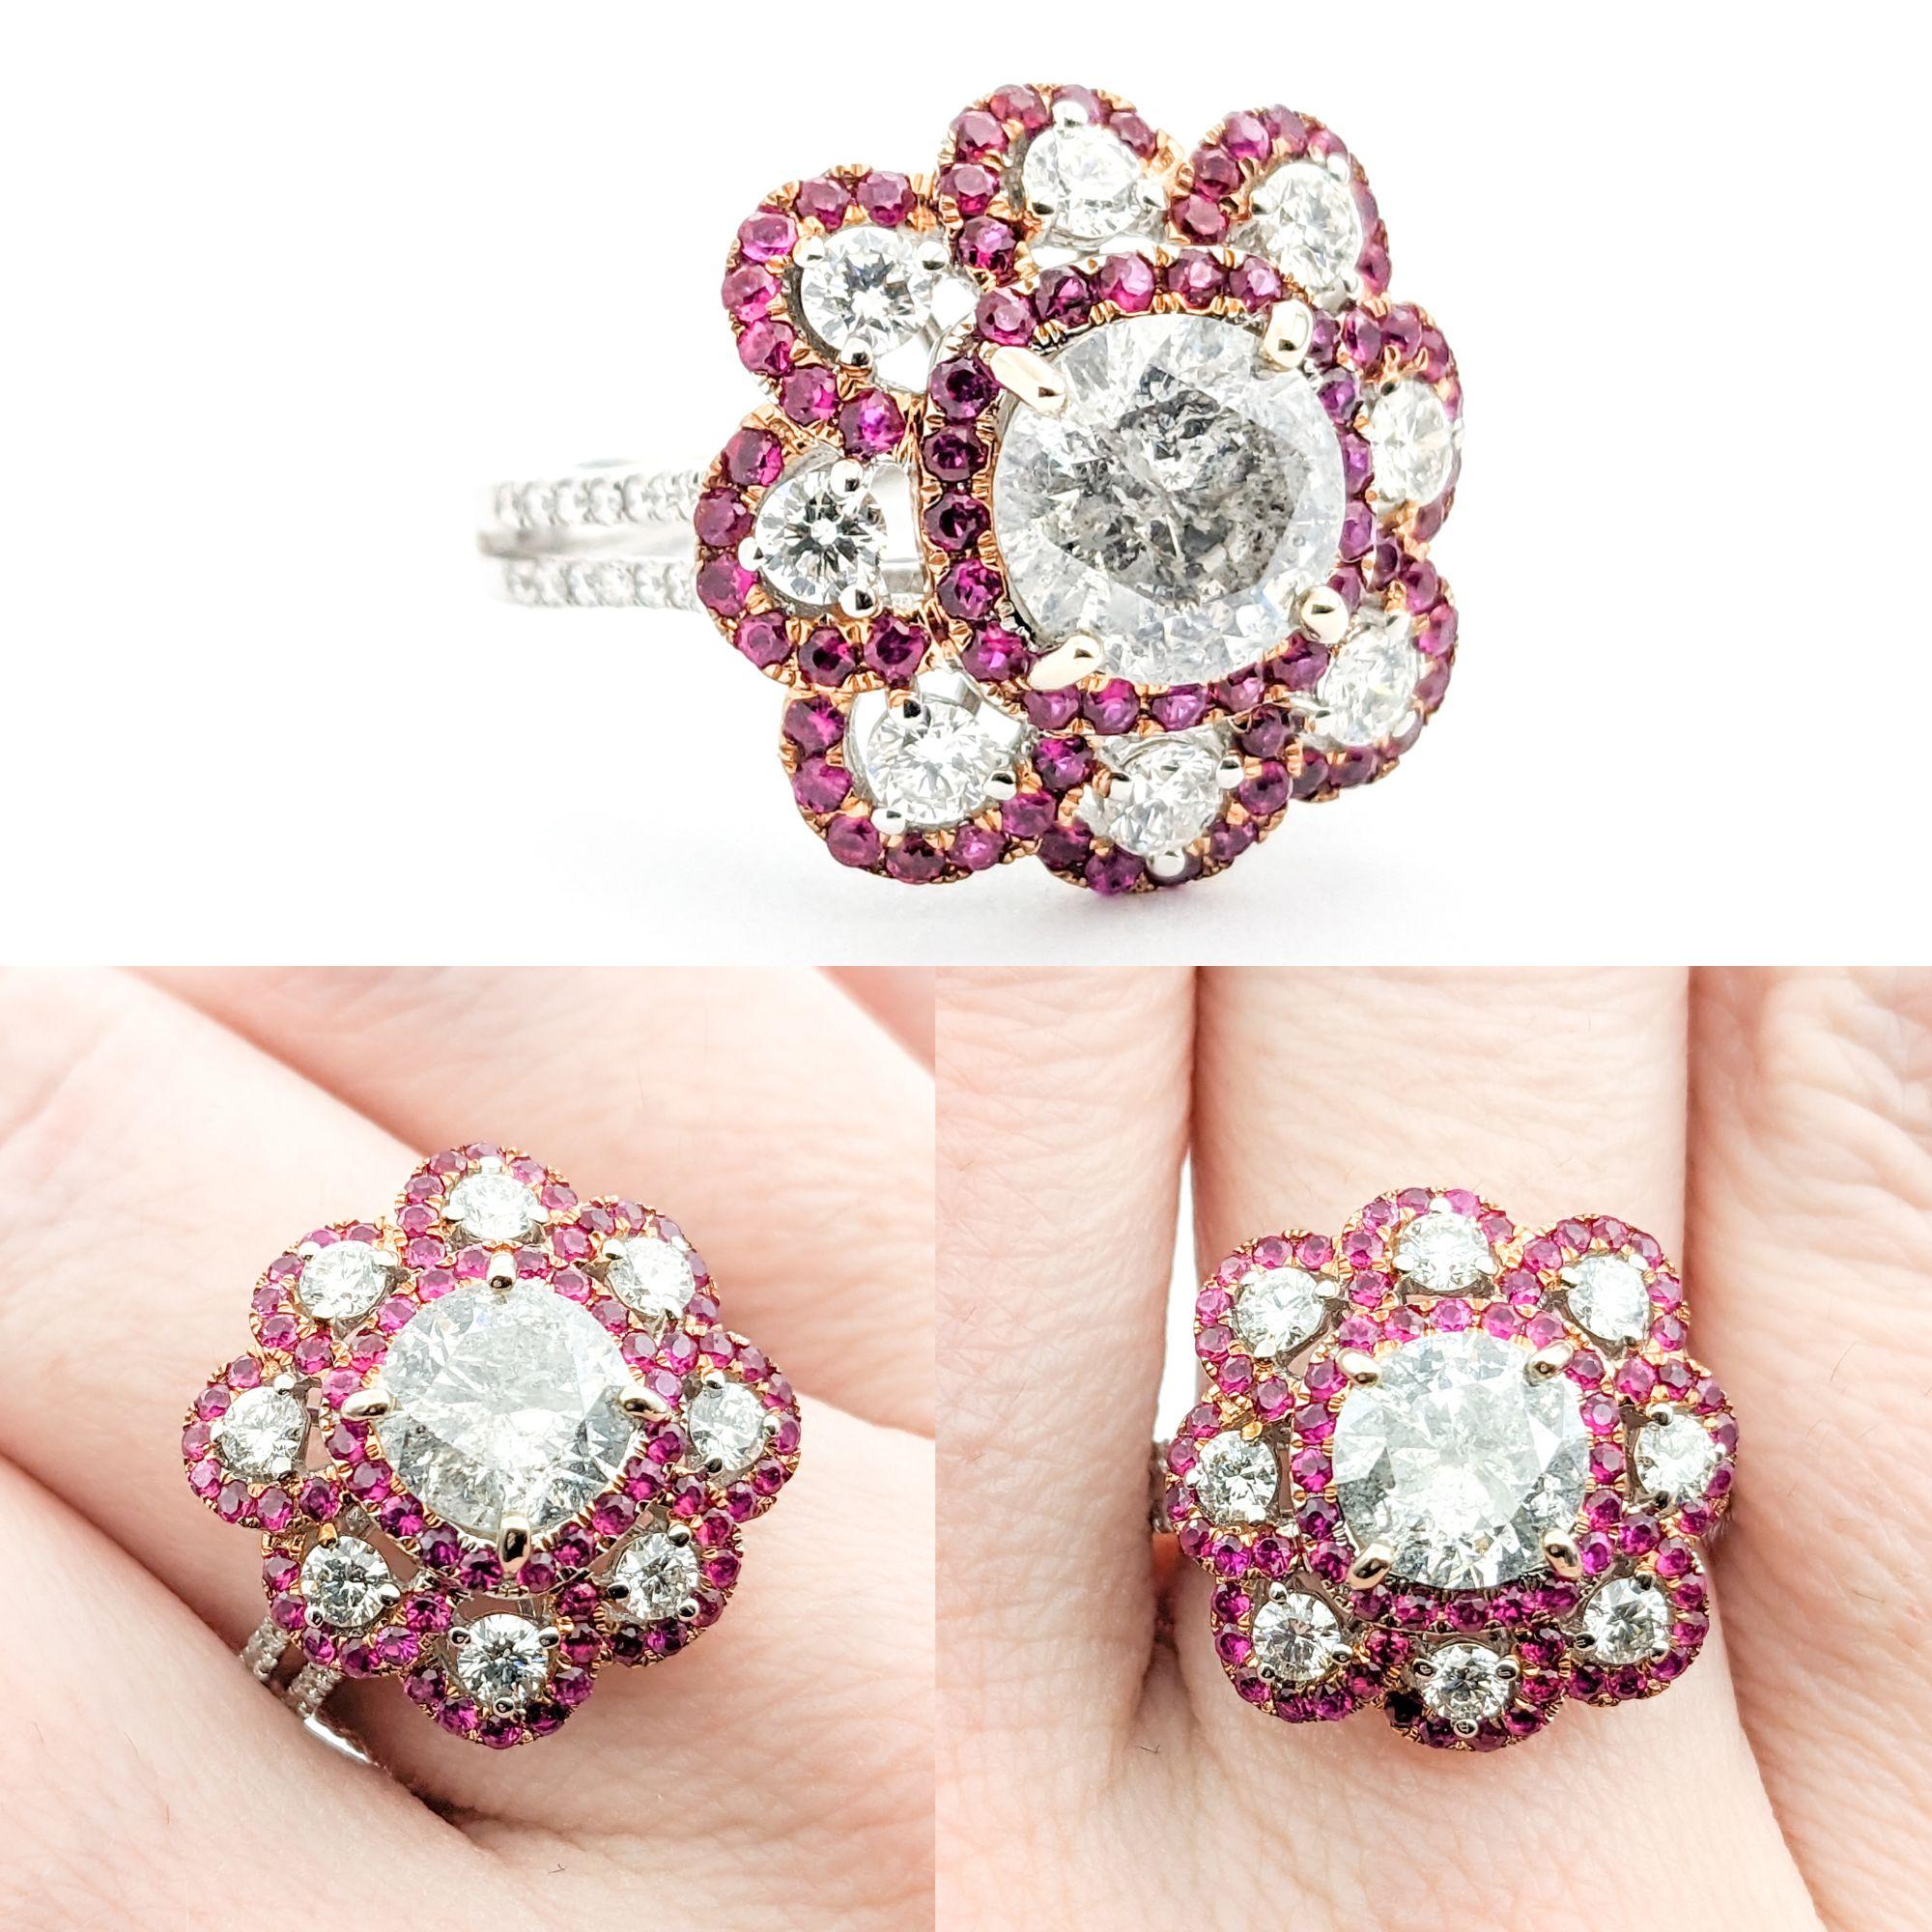 1.51ctw Diamond & Rubies In White Gold

Introducing this exquisite Diamond and Ruby Ring, masterfully crafted in 18k White Gold. This elegant piece features a stunning centerpiece composed of 1.51ctw of sparkling diamonds of I clarity, exhibiting a